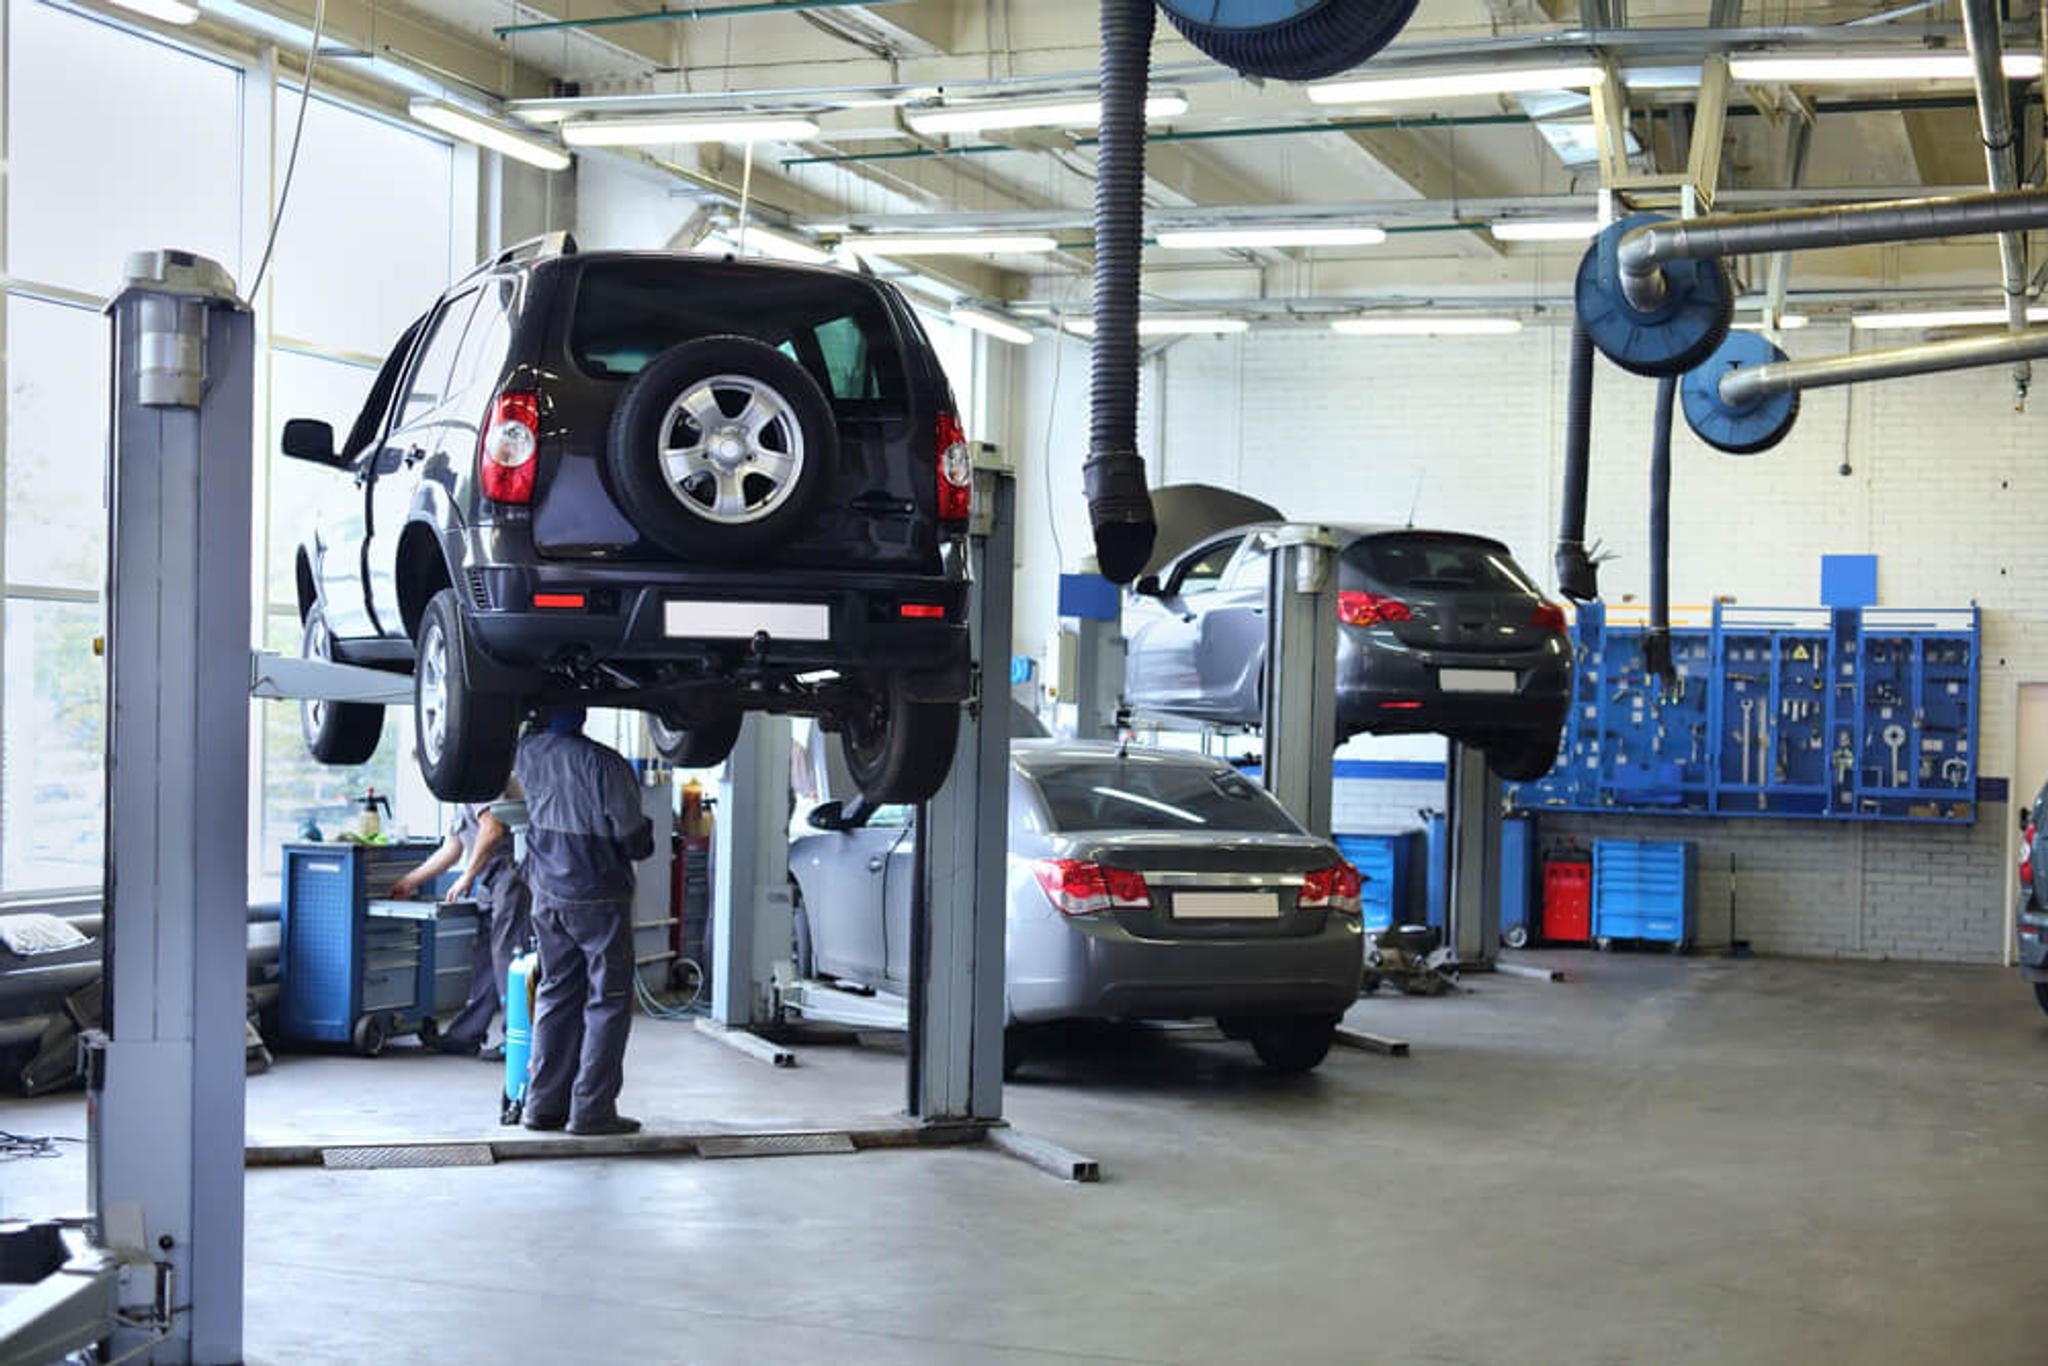 car inspection, car in a garage, vehicle technical inspection